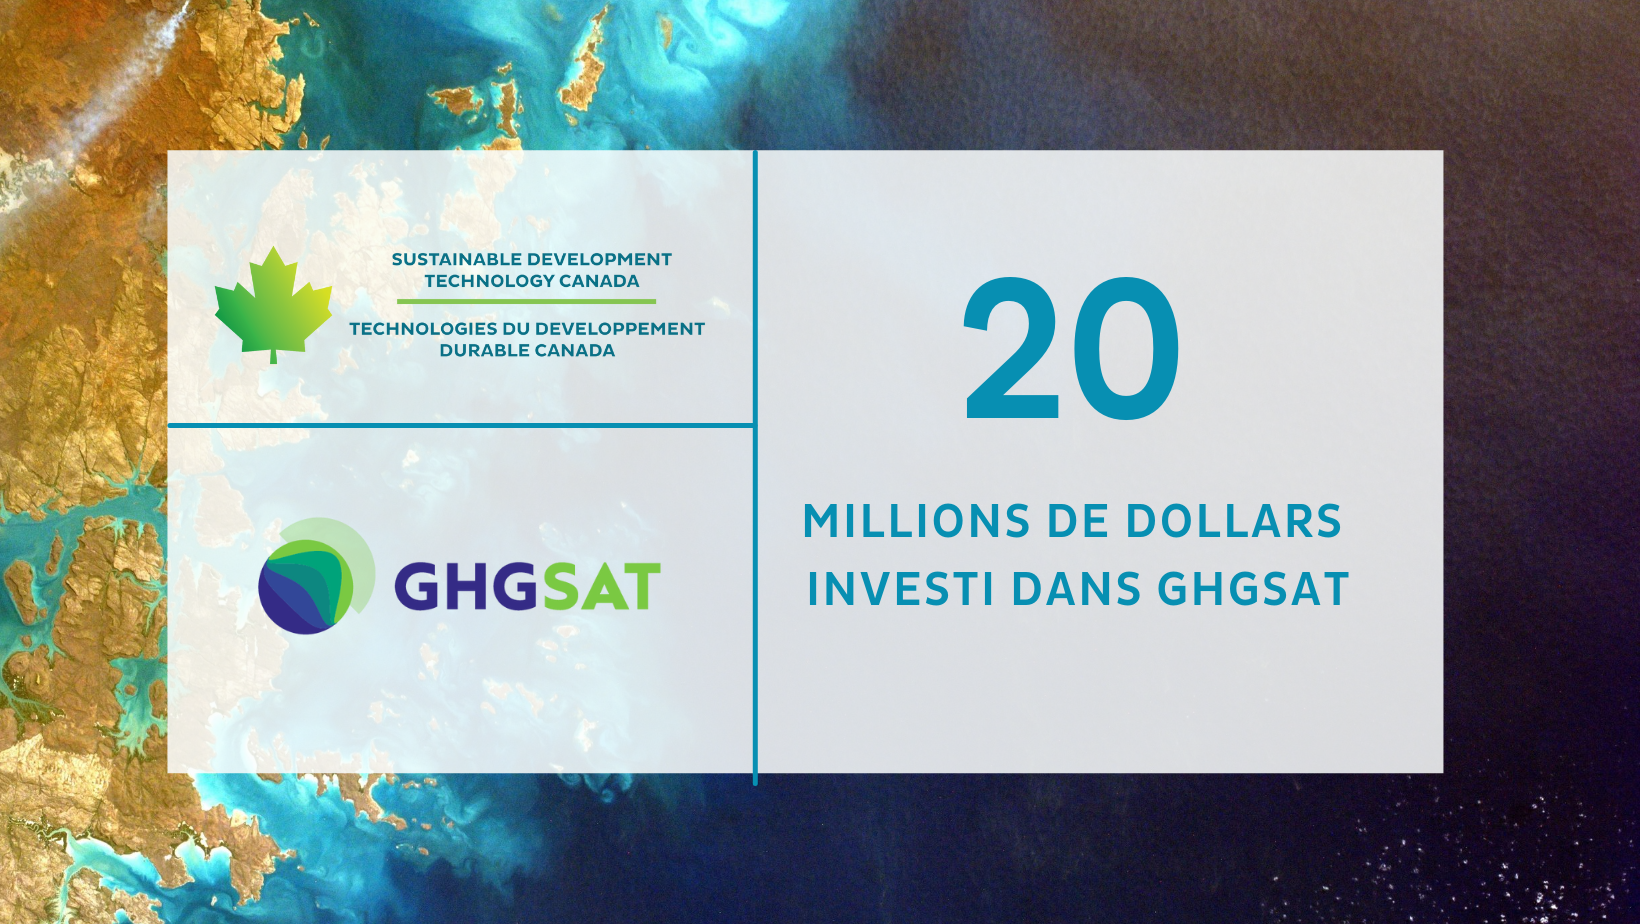 $20 Million Invested in GHGSAT